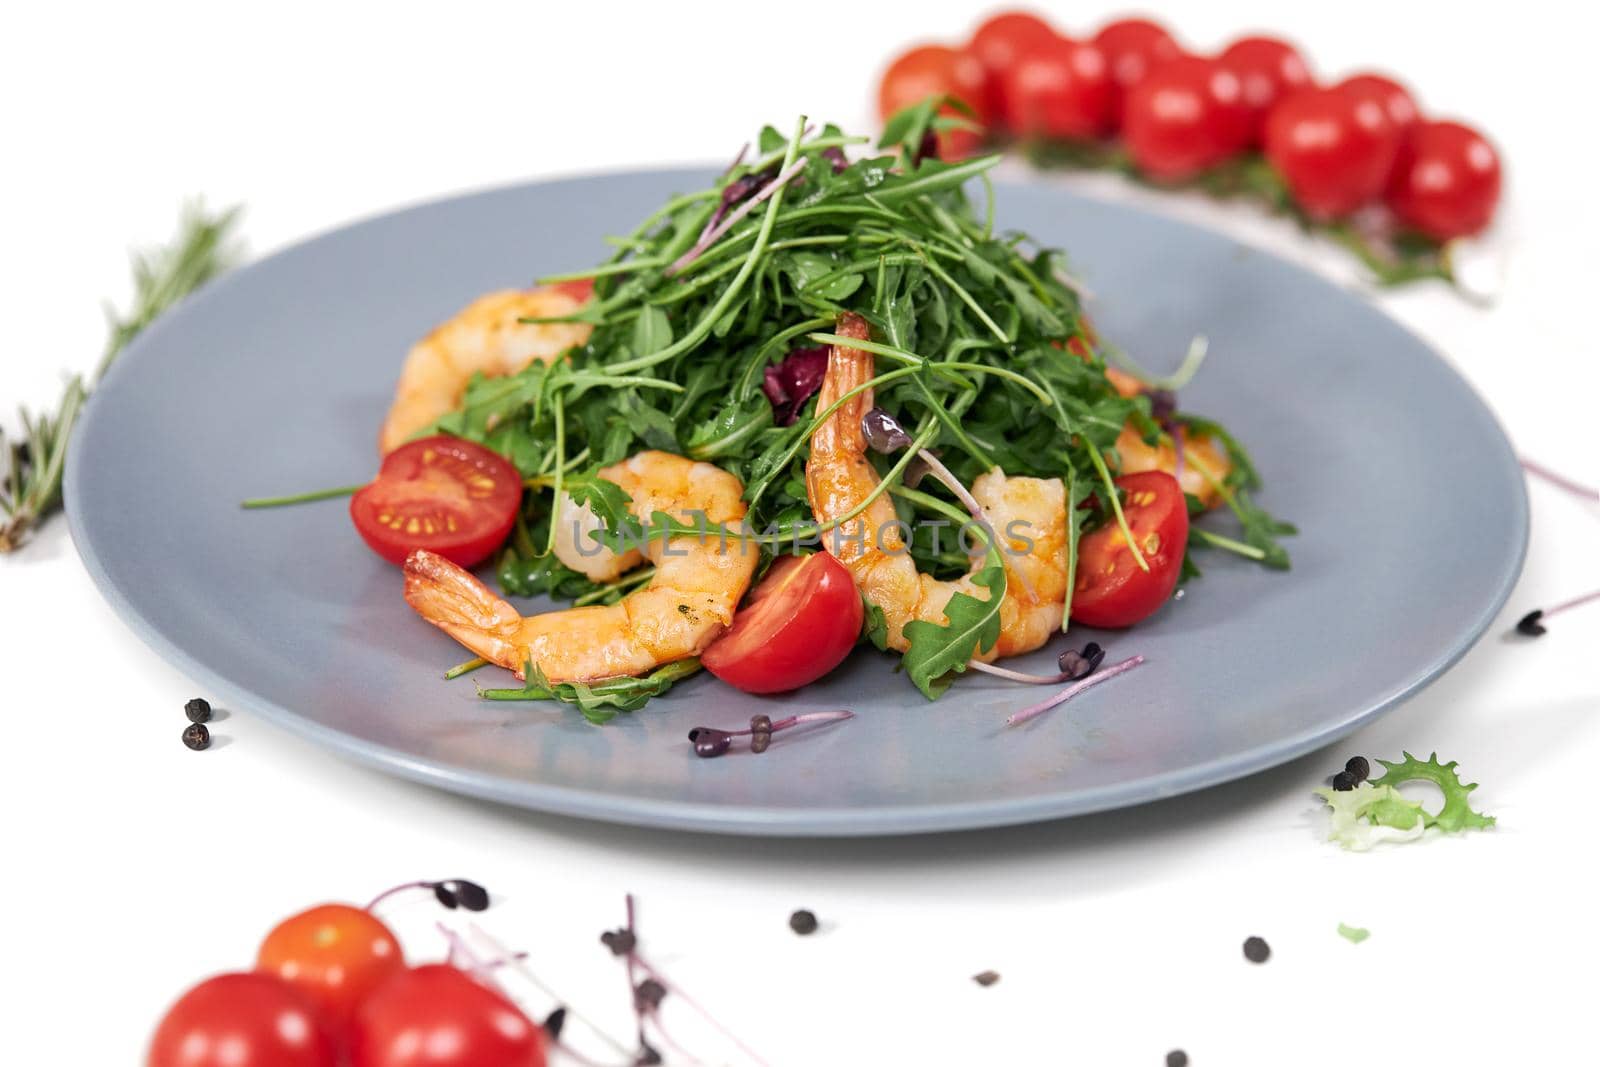 Tasty salad with juicy shrimps,tomatoes and fresh arugula.  by SerhiiBobyk